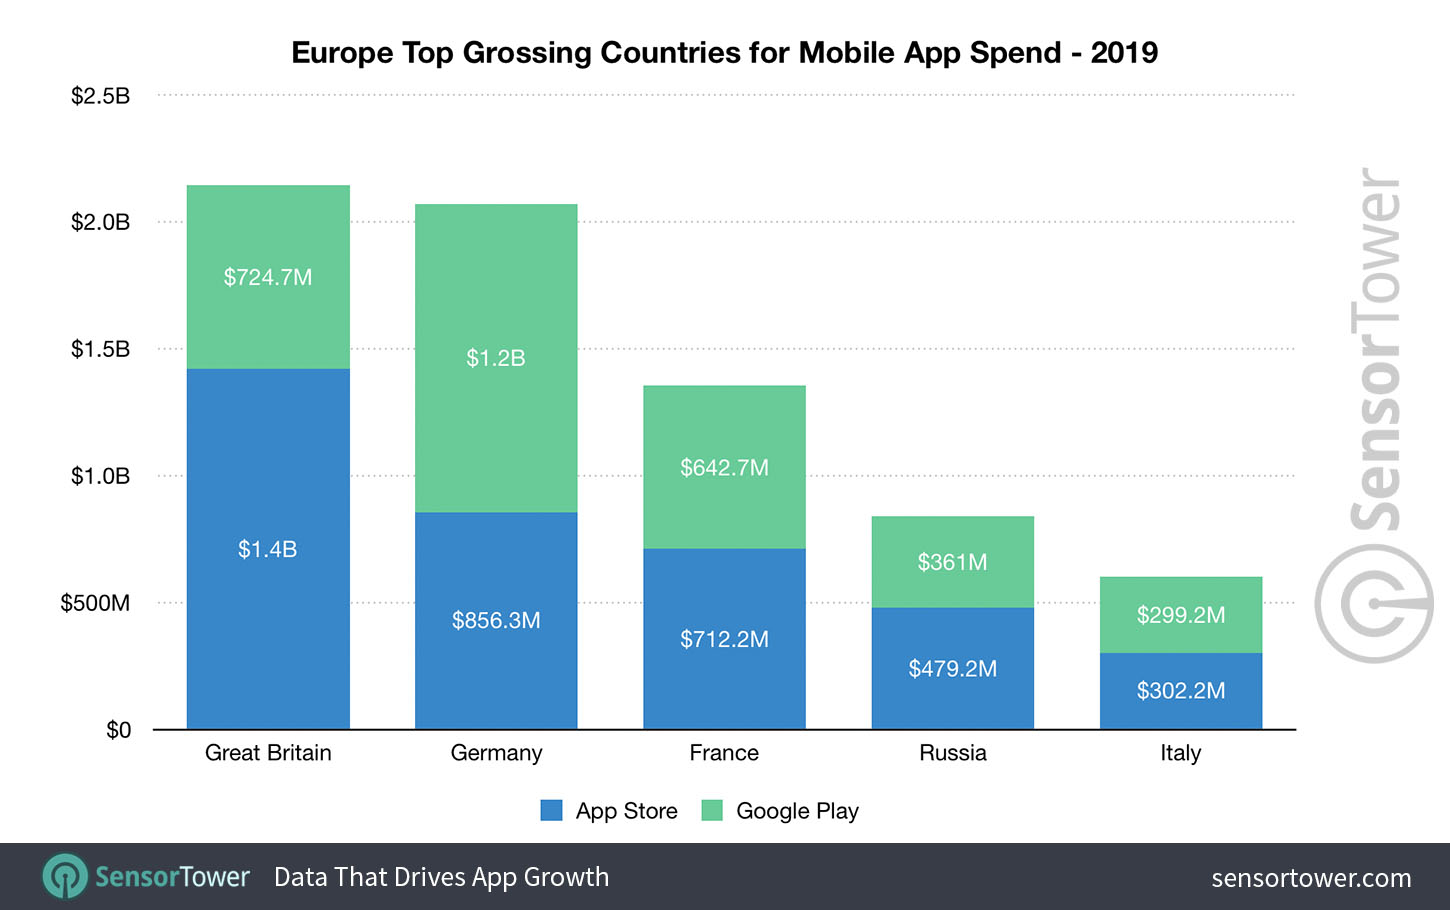 Europe top grossing countries for mobile app spend 2019